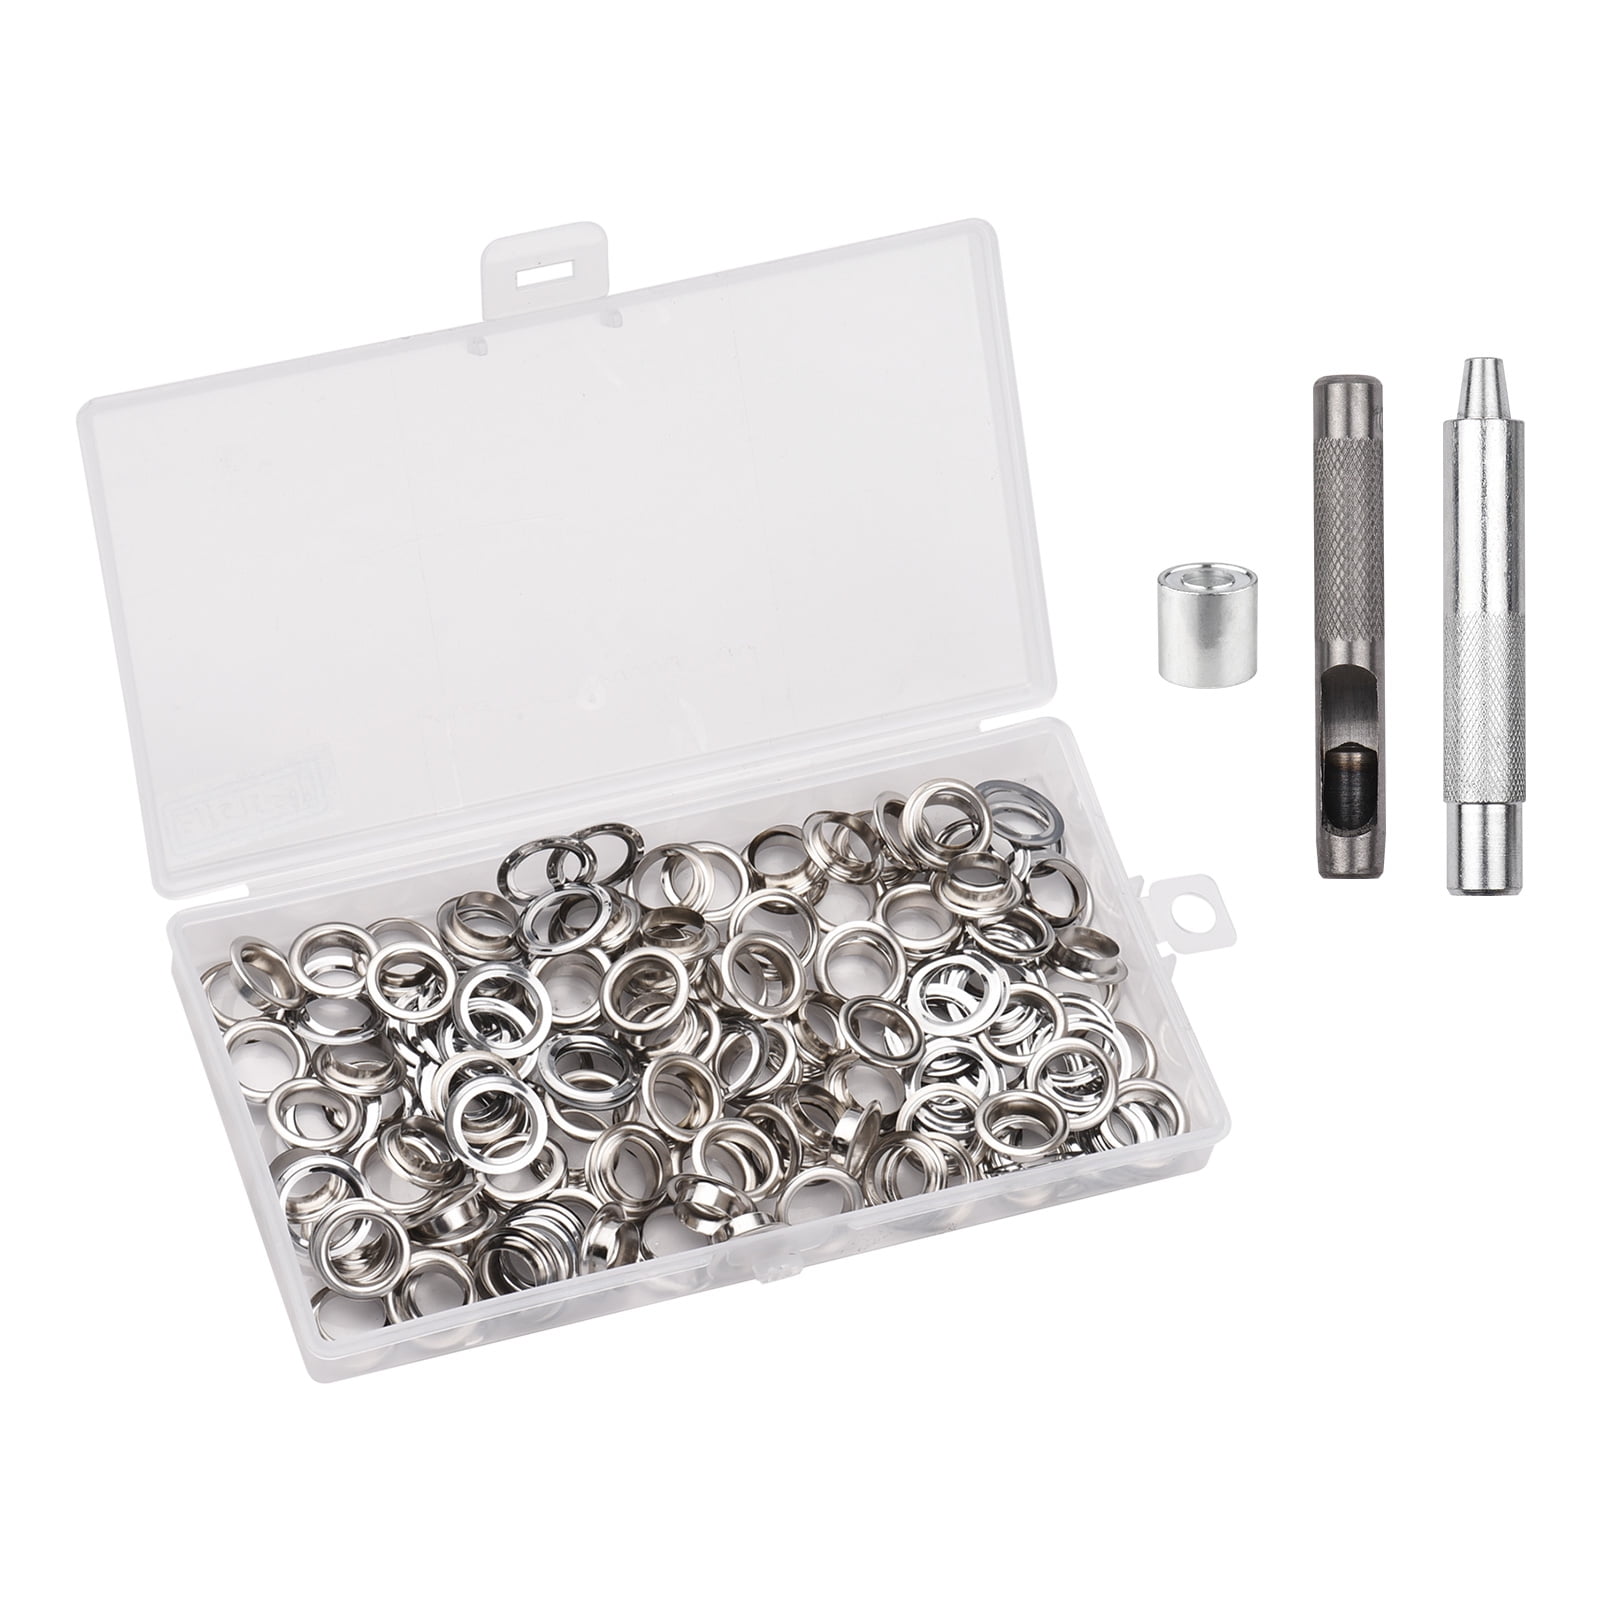 WeChef 1000pcs #2 0.39 inch Grommet 10mm Nickel Finish Eyelets for Semi-Automatic Grommet Machine Poster Curtain Tag Bag